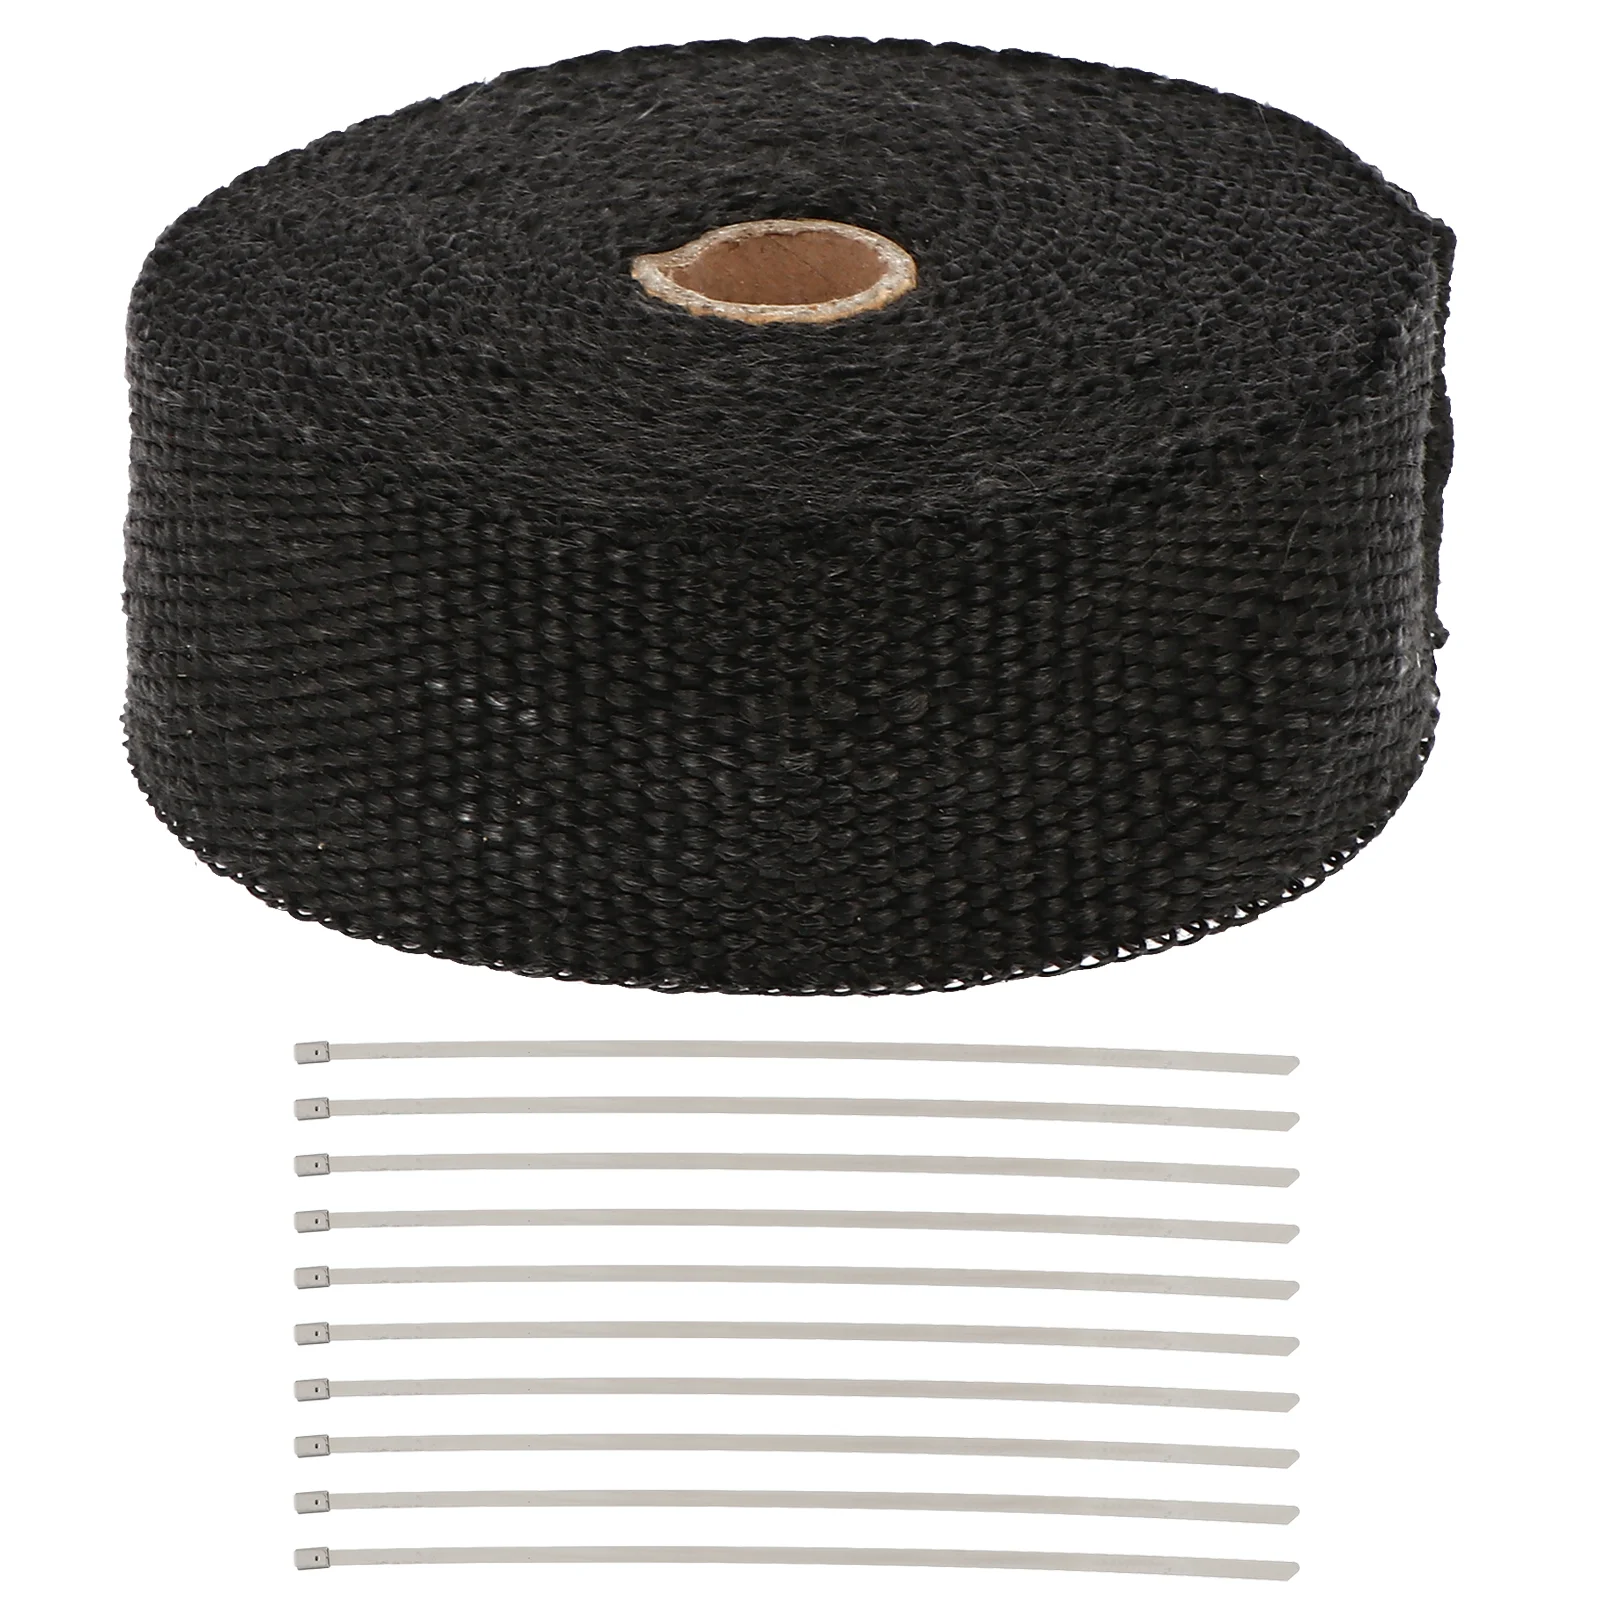 

10 M Insulation Belt Duct Tape Exhaust Wrap Heat Motorcycle Shield Glass Fiber Downpipe Insulated Self-adhesive thermal